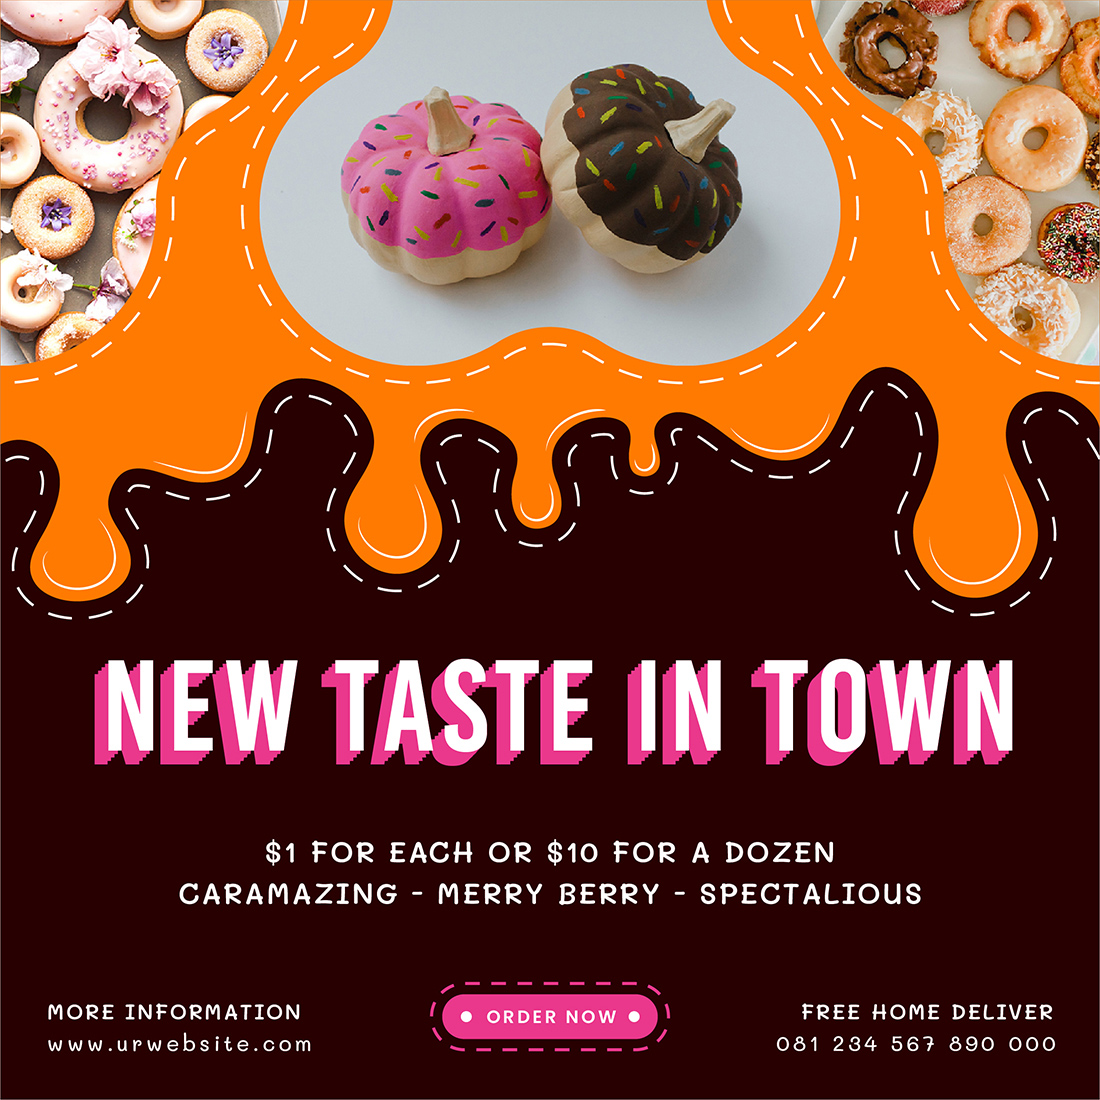 Delicious Donuts Social Media Post Templates new taste in town.